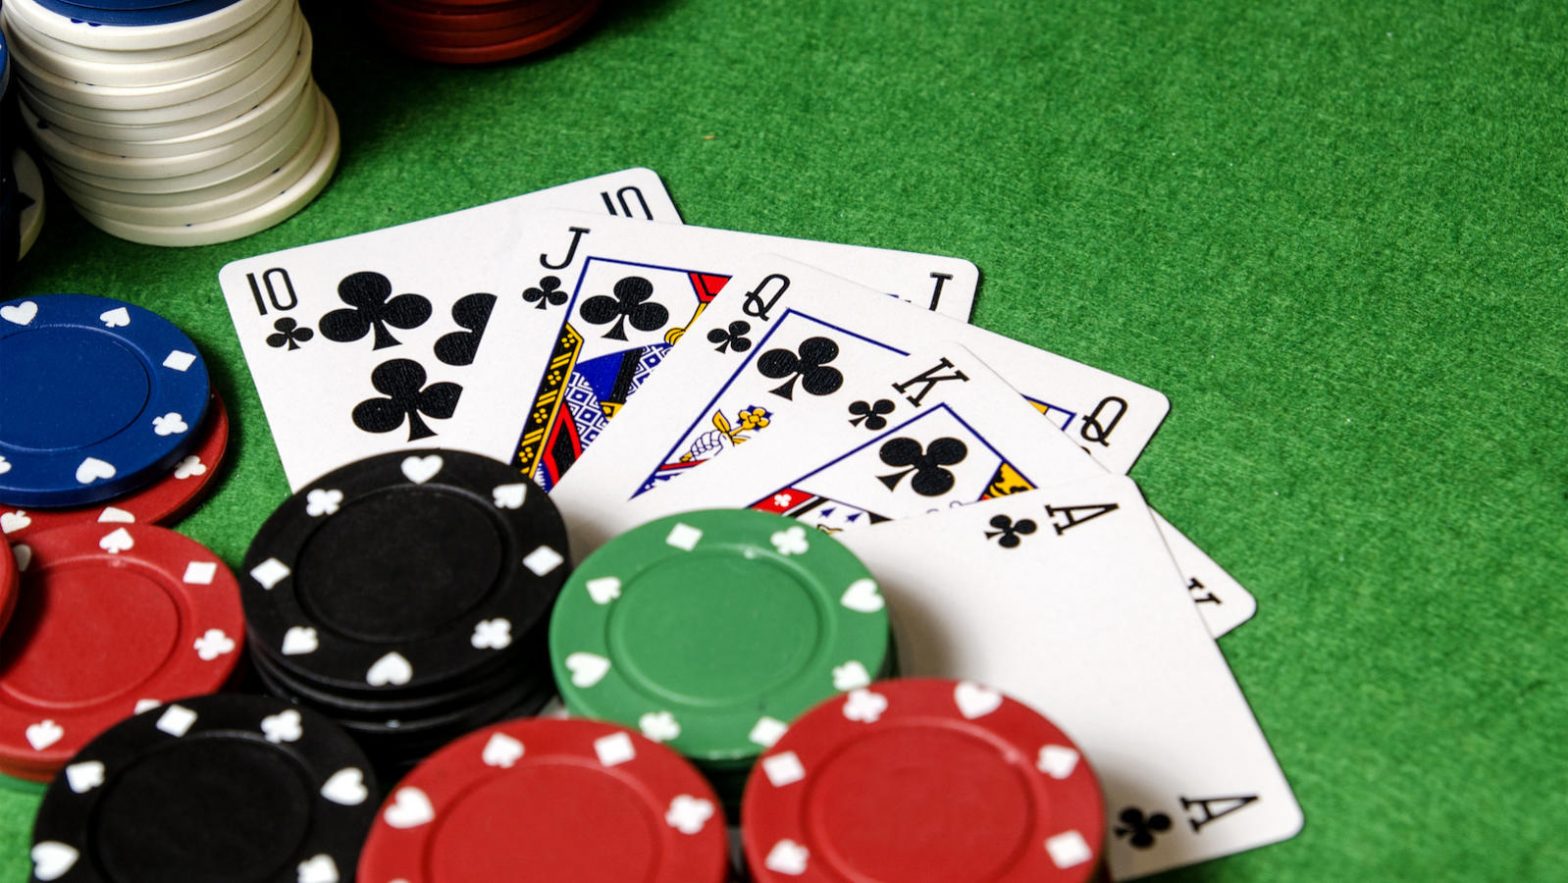 Links for enroll in poker games and latest versions